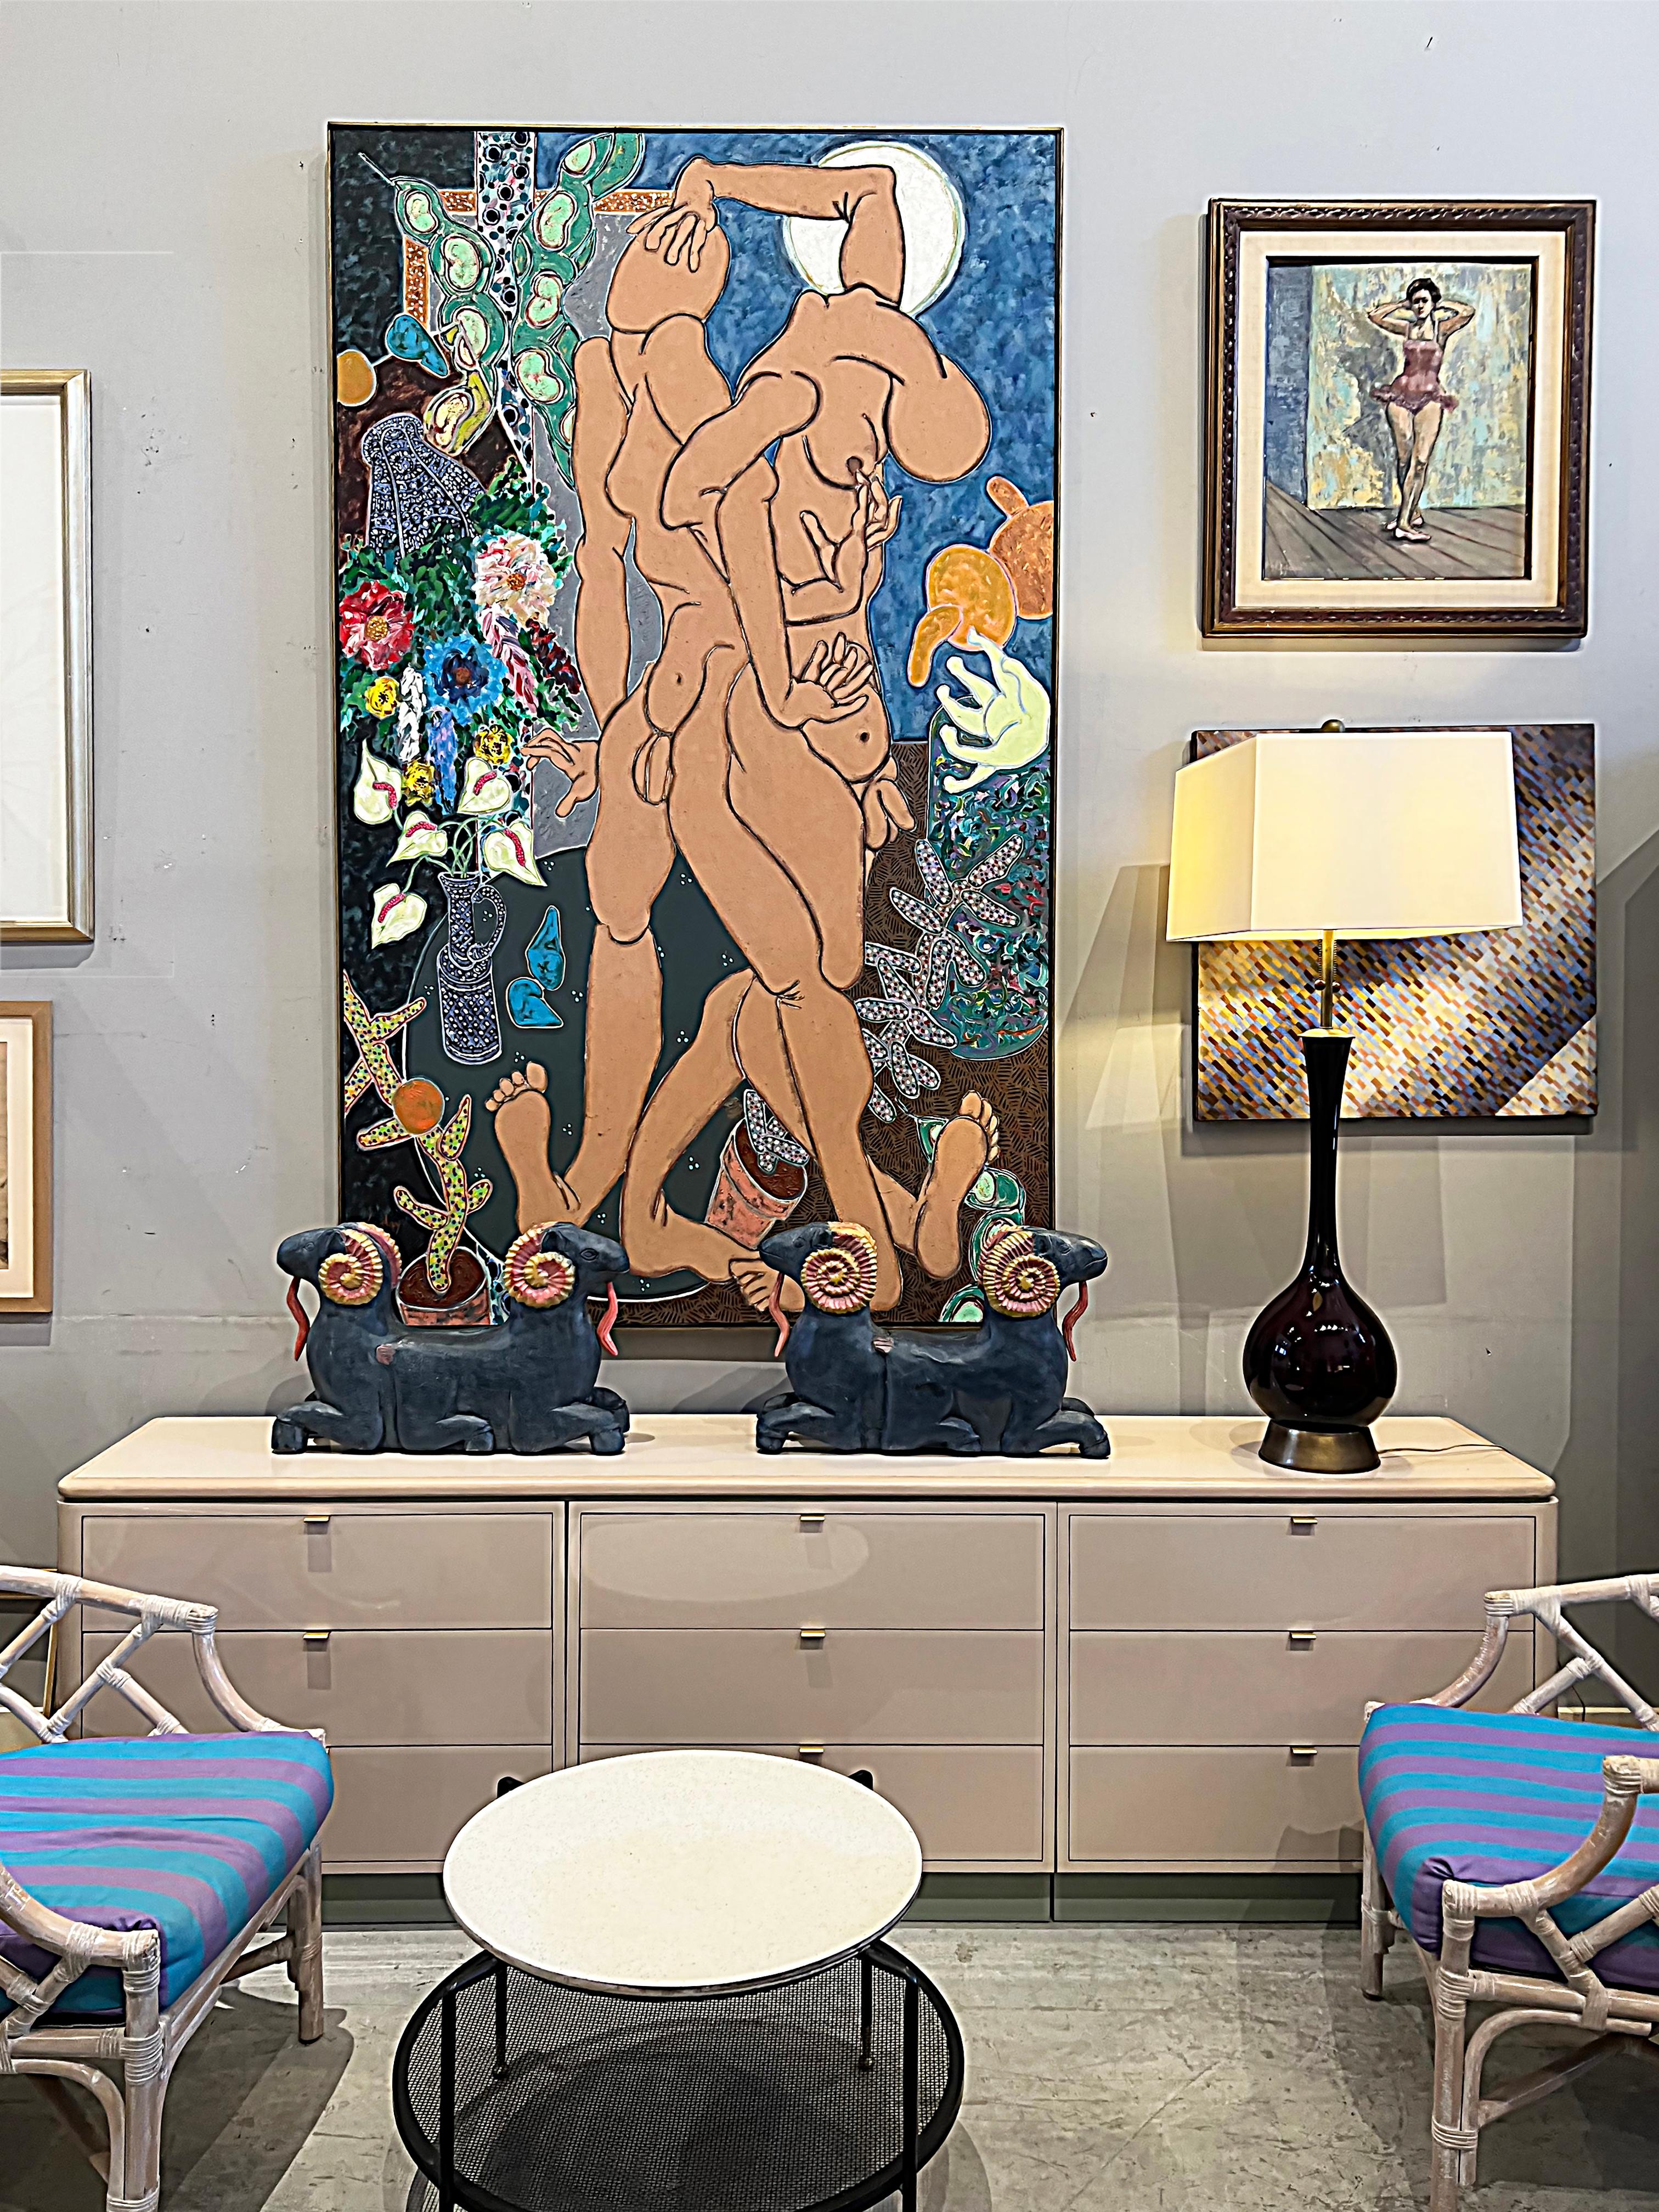 Monumental Harley Francis abstract male nudes oil painting on canvas

Offered for sale is a monumental abstract oil painting by Harley Frances ( 1940-2017). The subjects are 2 of Francis' abstract male nudes surrounded by floral motifs. The painting